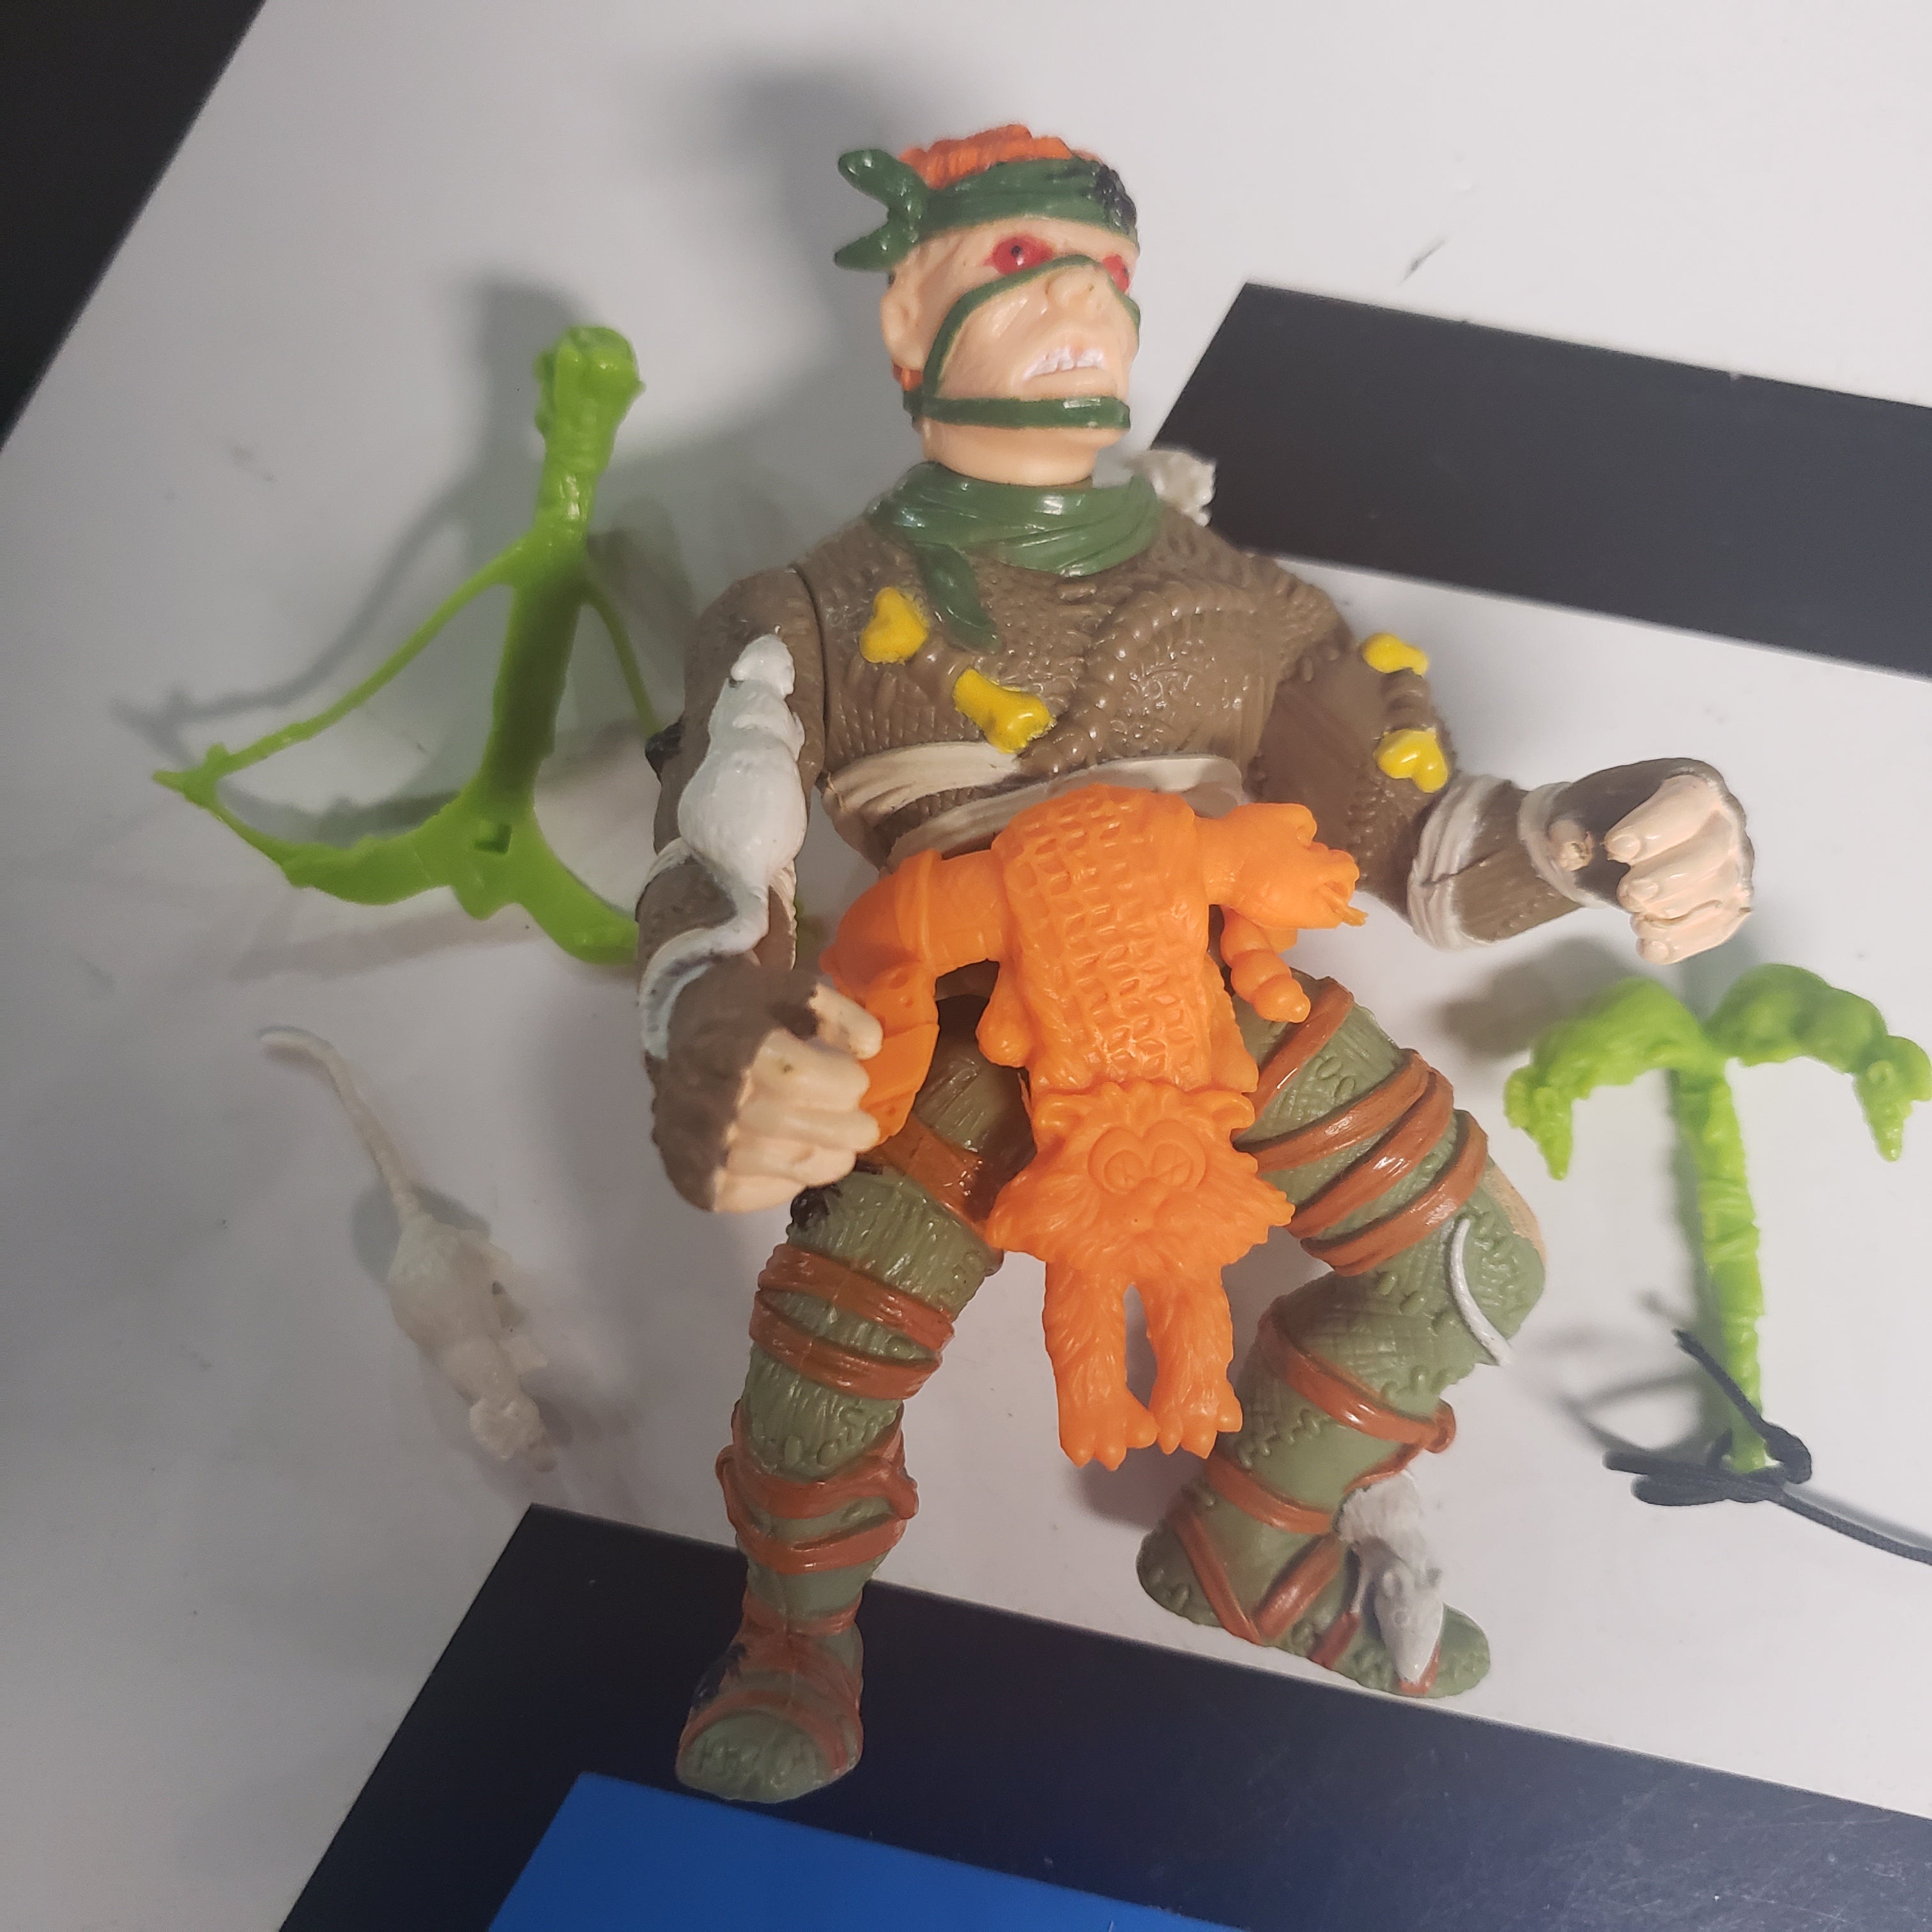 Action Figure Review: Rat King from Teenage Mutant Ninja Turtles by  Playmates (Confirmed: Good)